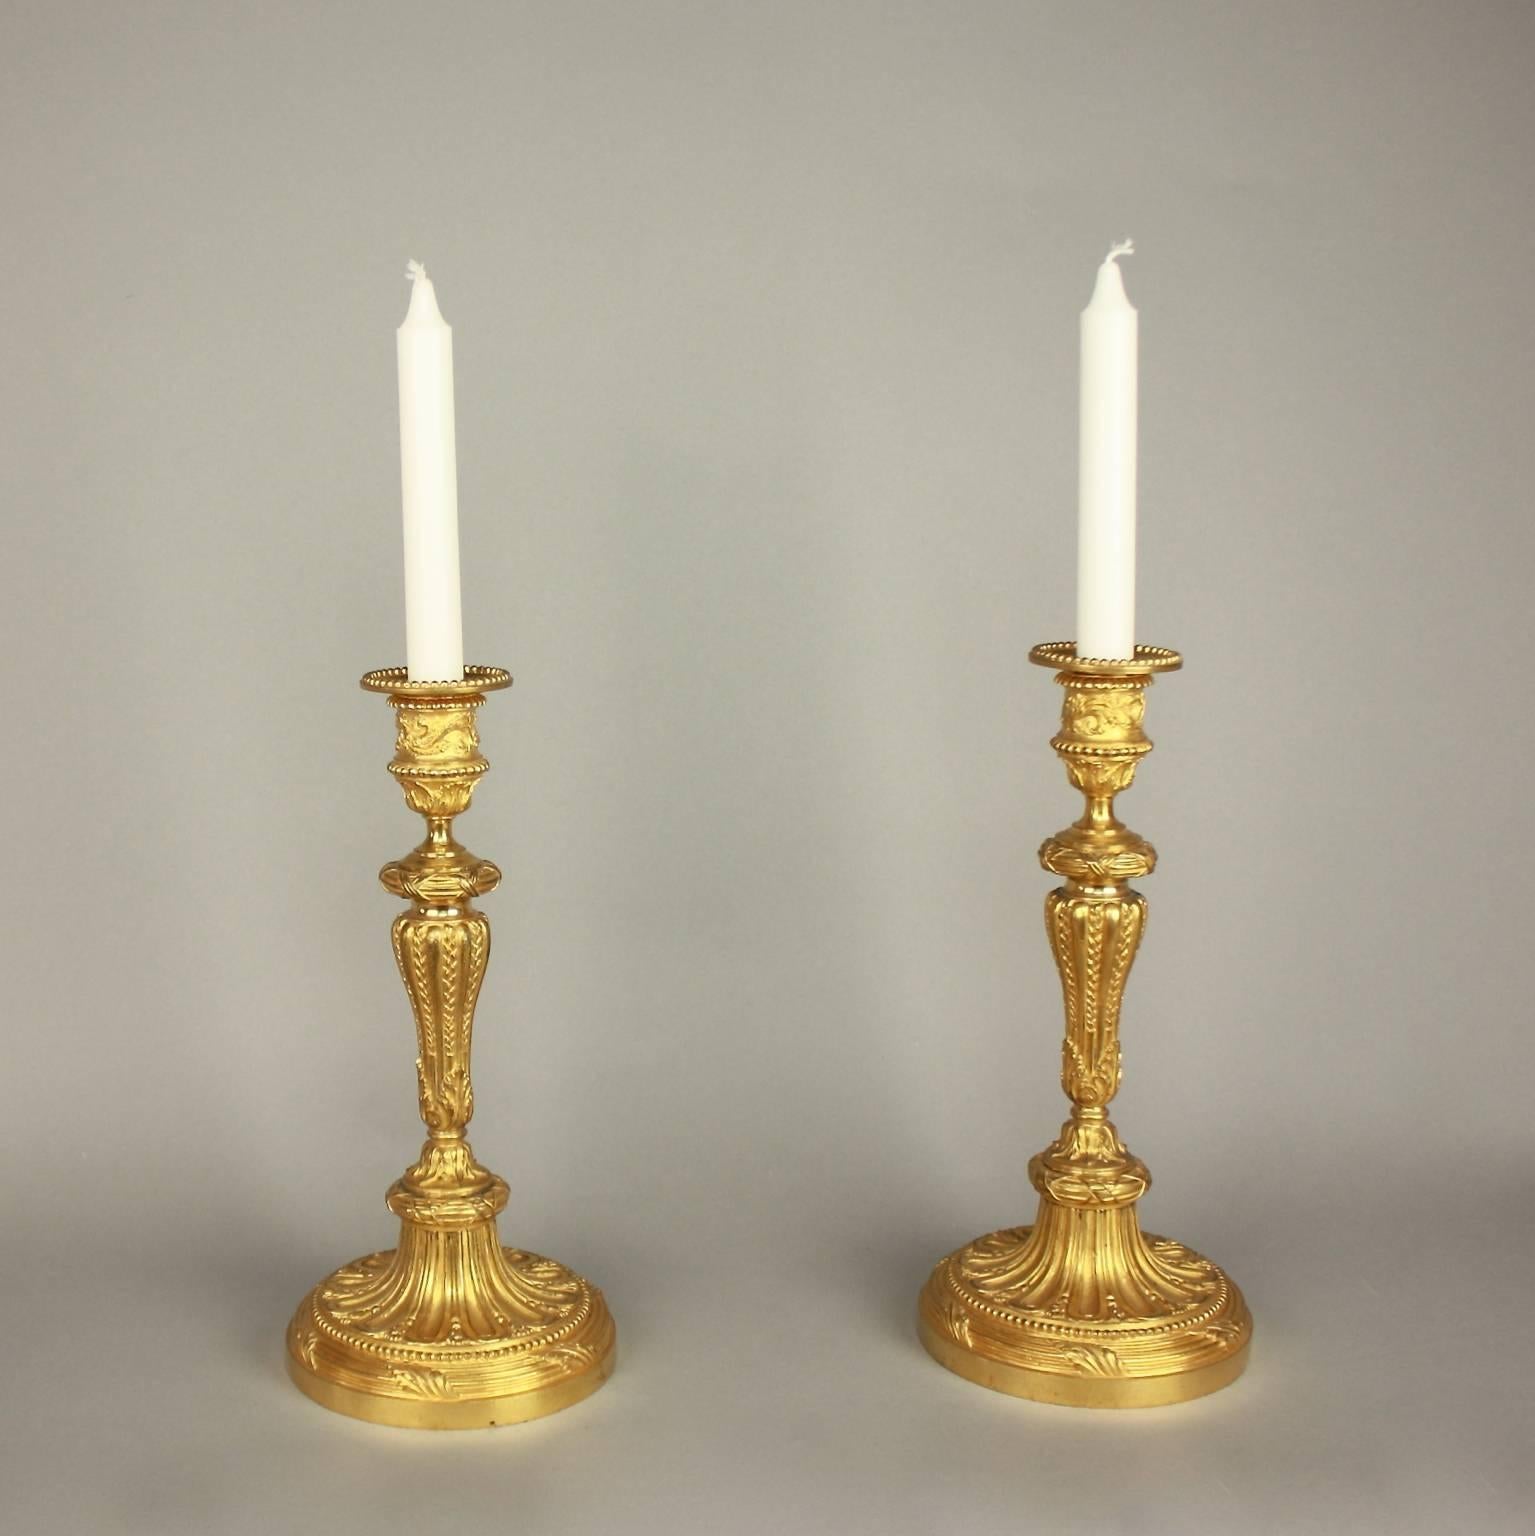 A fine pair of late 19th century Louis XVI style gilt bronze candlesticks, each with a foliate cast nozzle, a fluted tapering stem and an acanthus leaf decorated circular base with ribbon tied garland and gadrooning. Finely cast and chased.